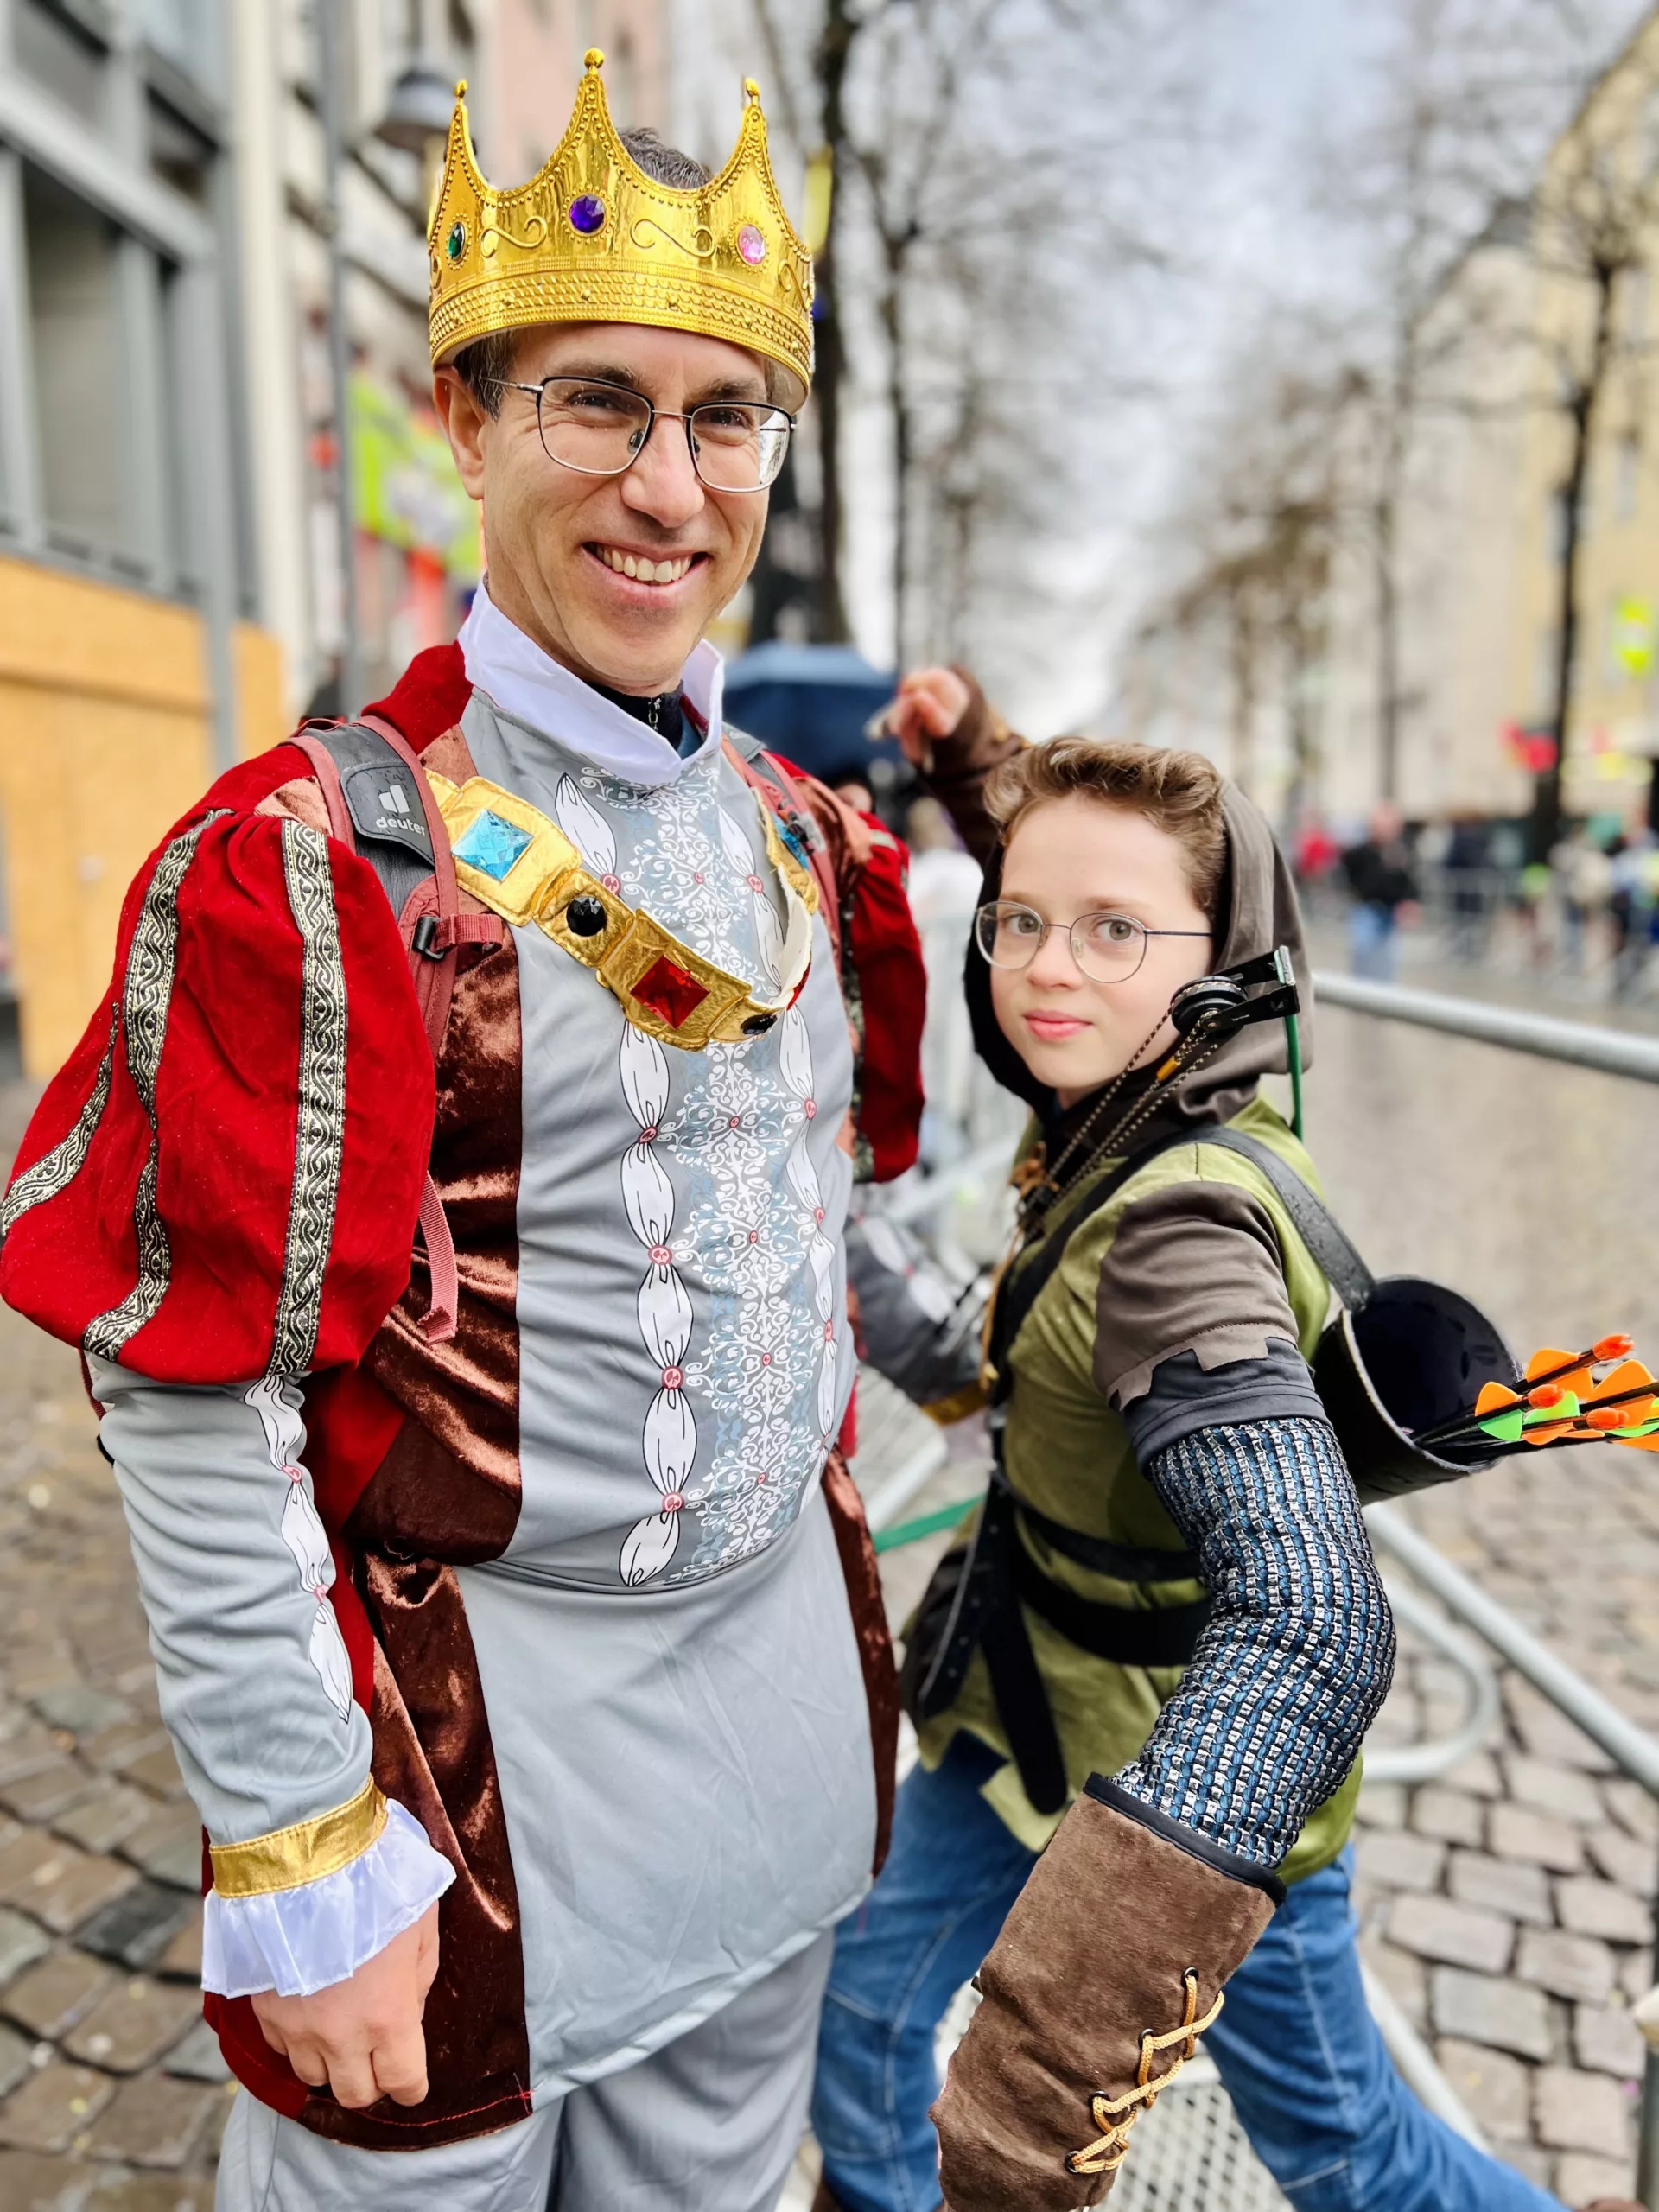 When it comes to Carnival in Cologne, the funnier and crazier your costume is, the better!